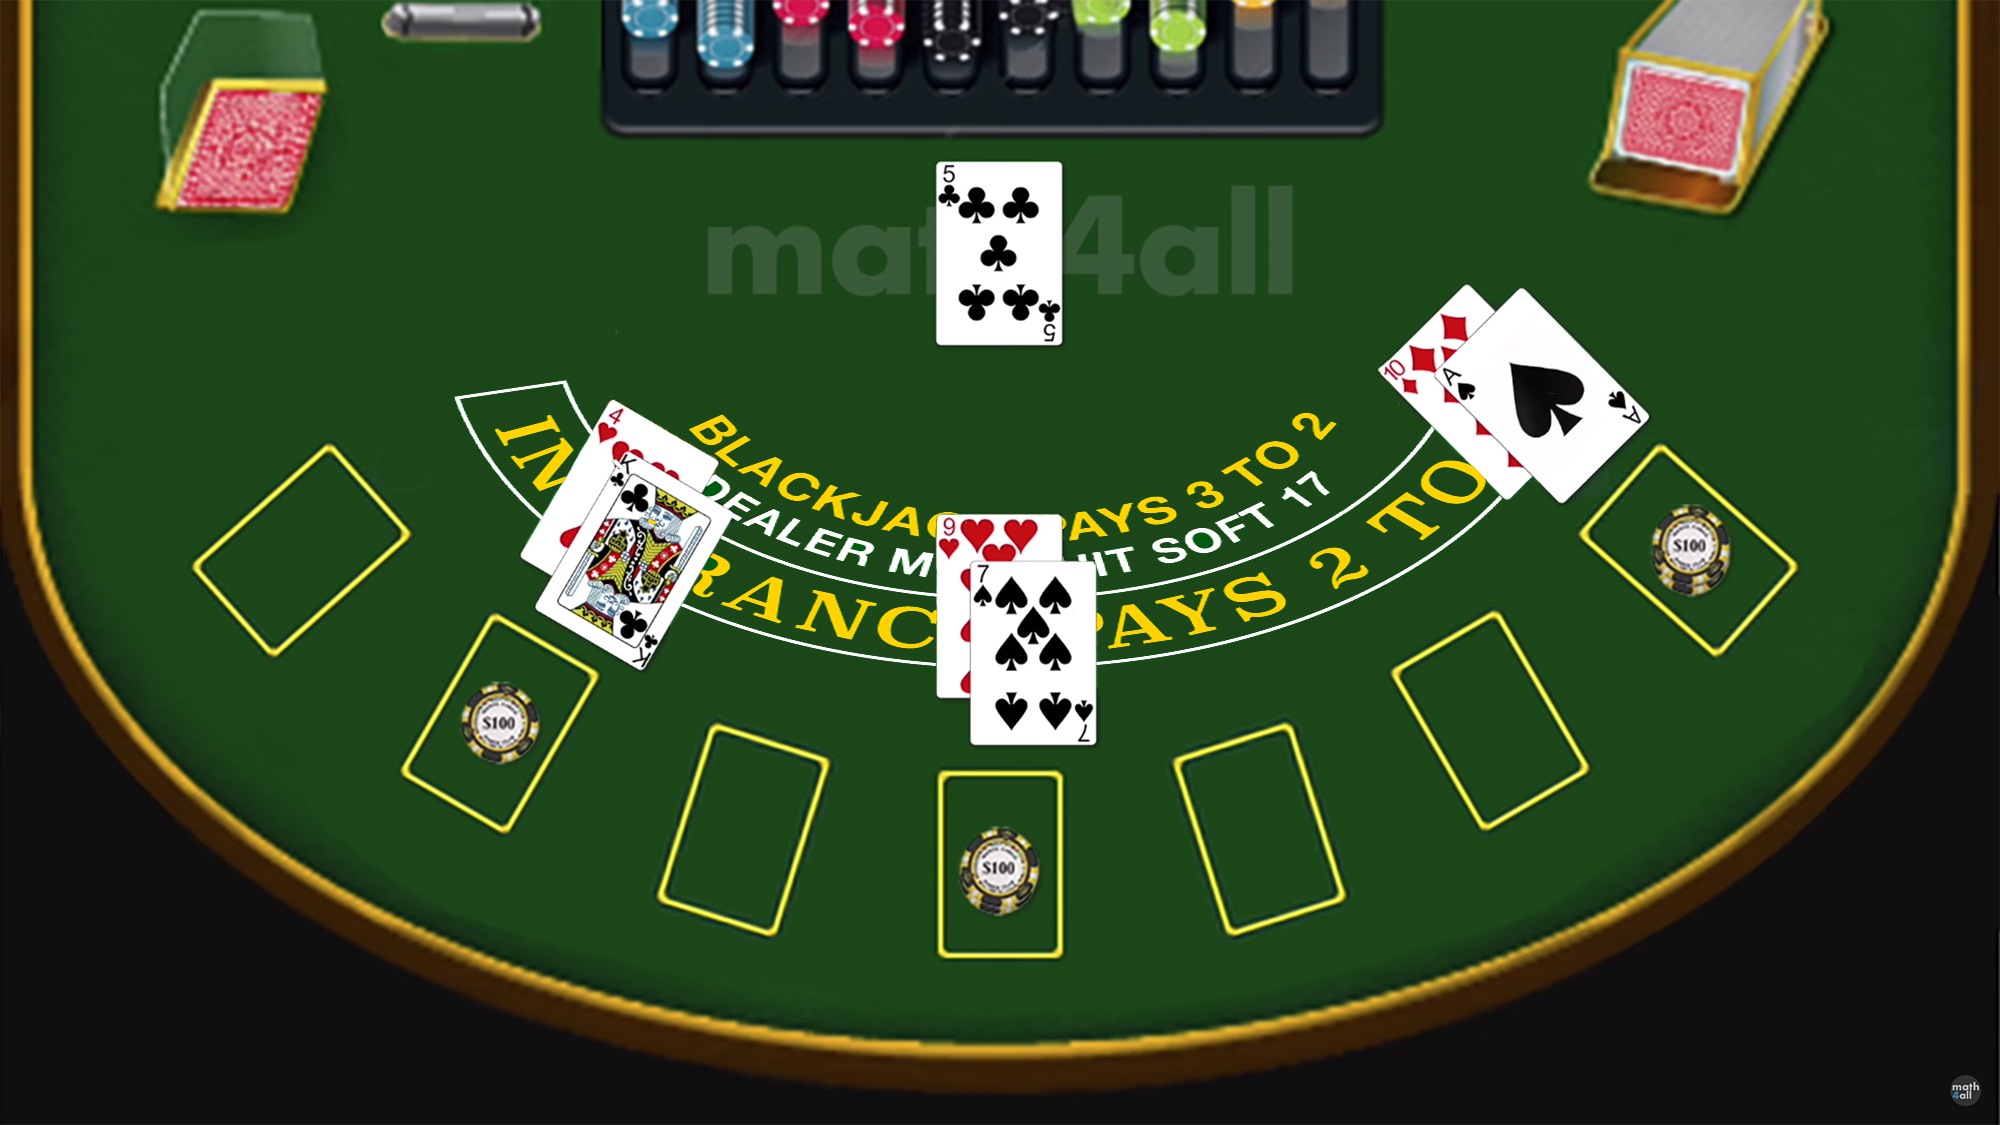 How is the dealer's hand constructed in Blackjack?